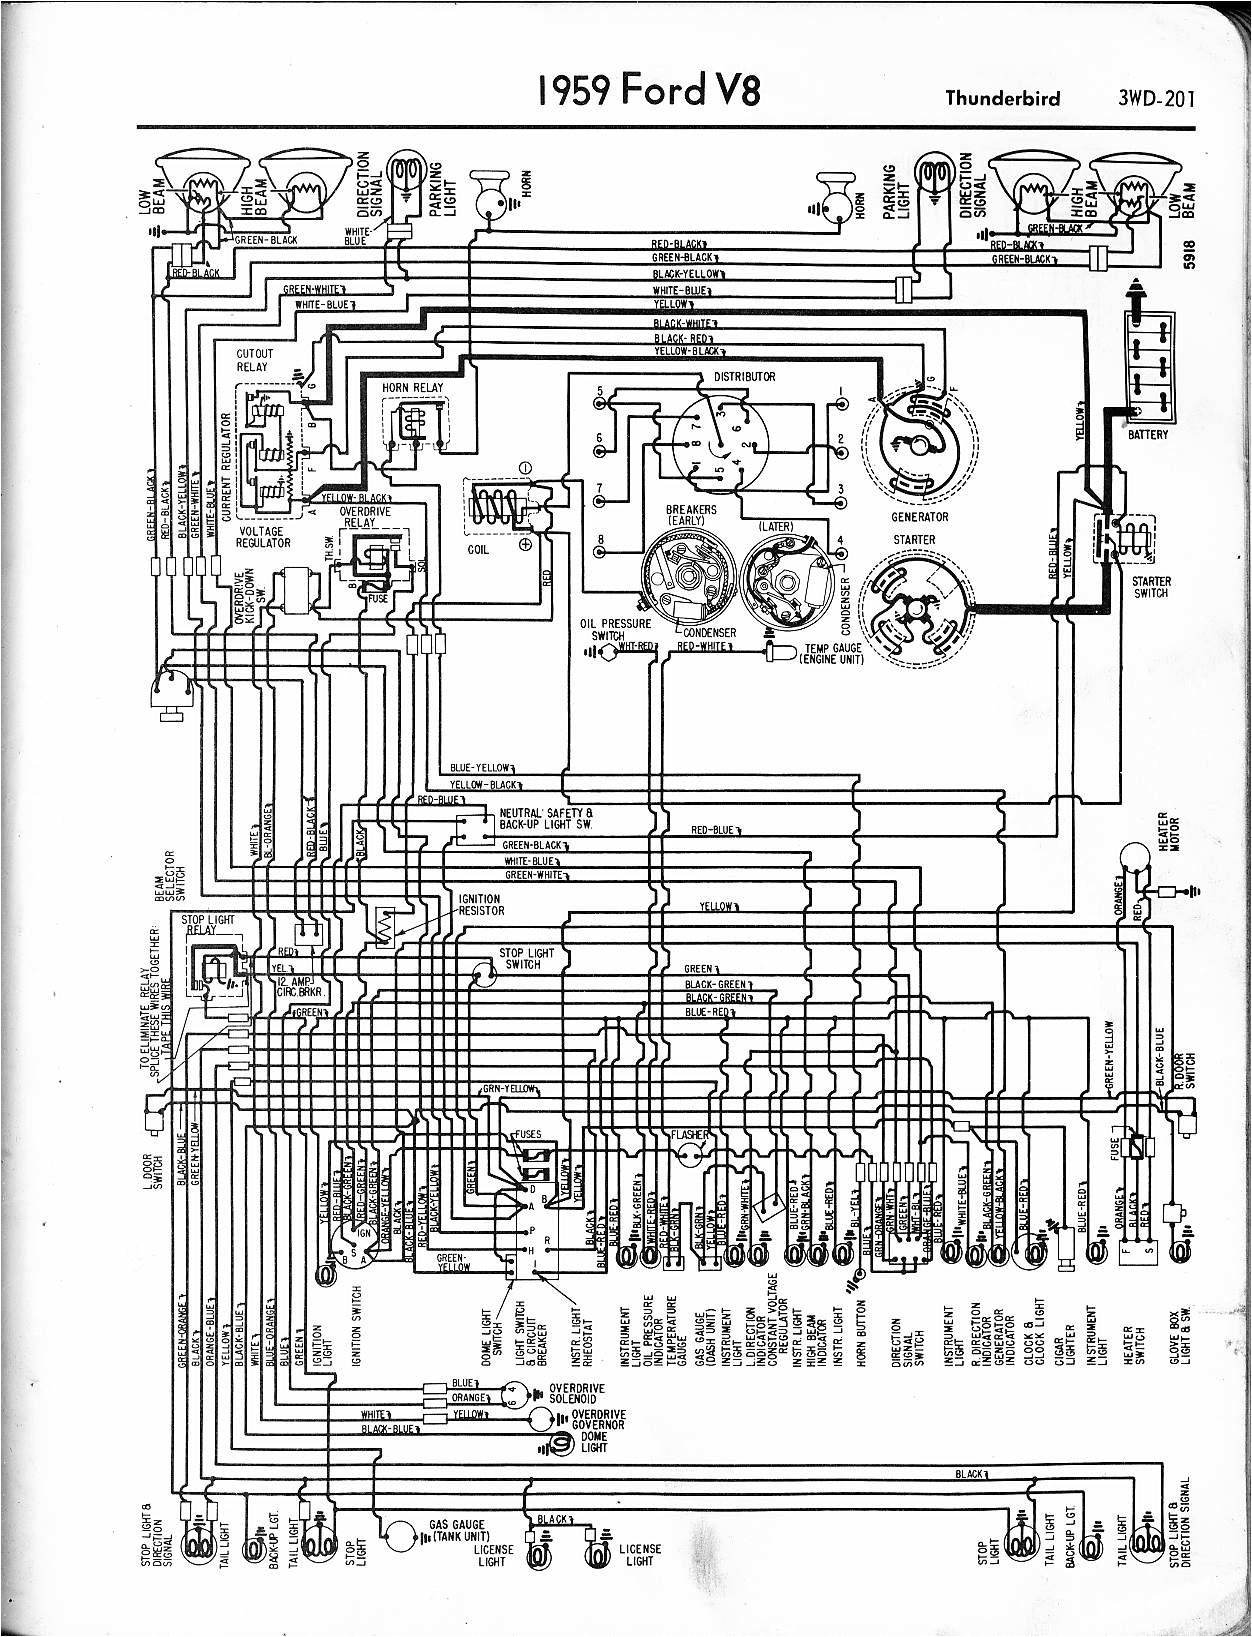 1970 ford f100 wiring harness wiring diagram info 1970 ford f100 wiring harness